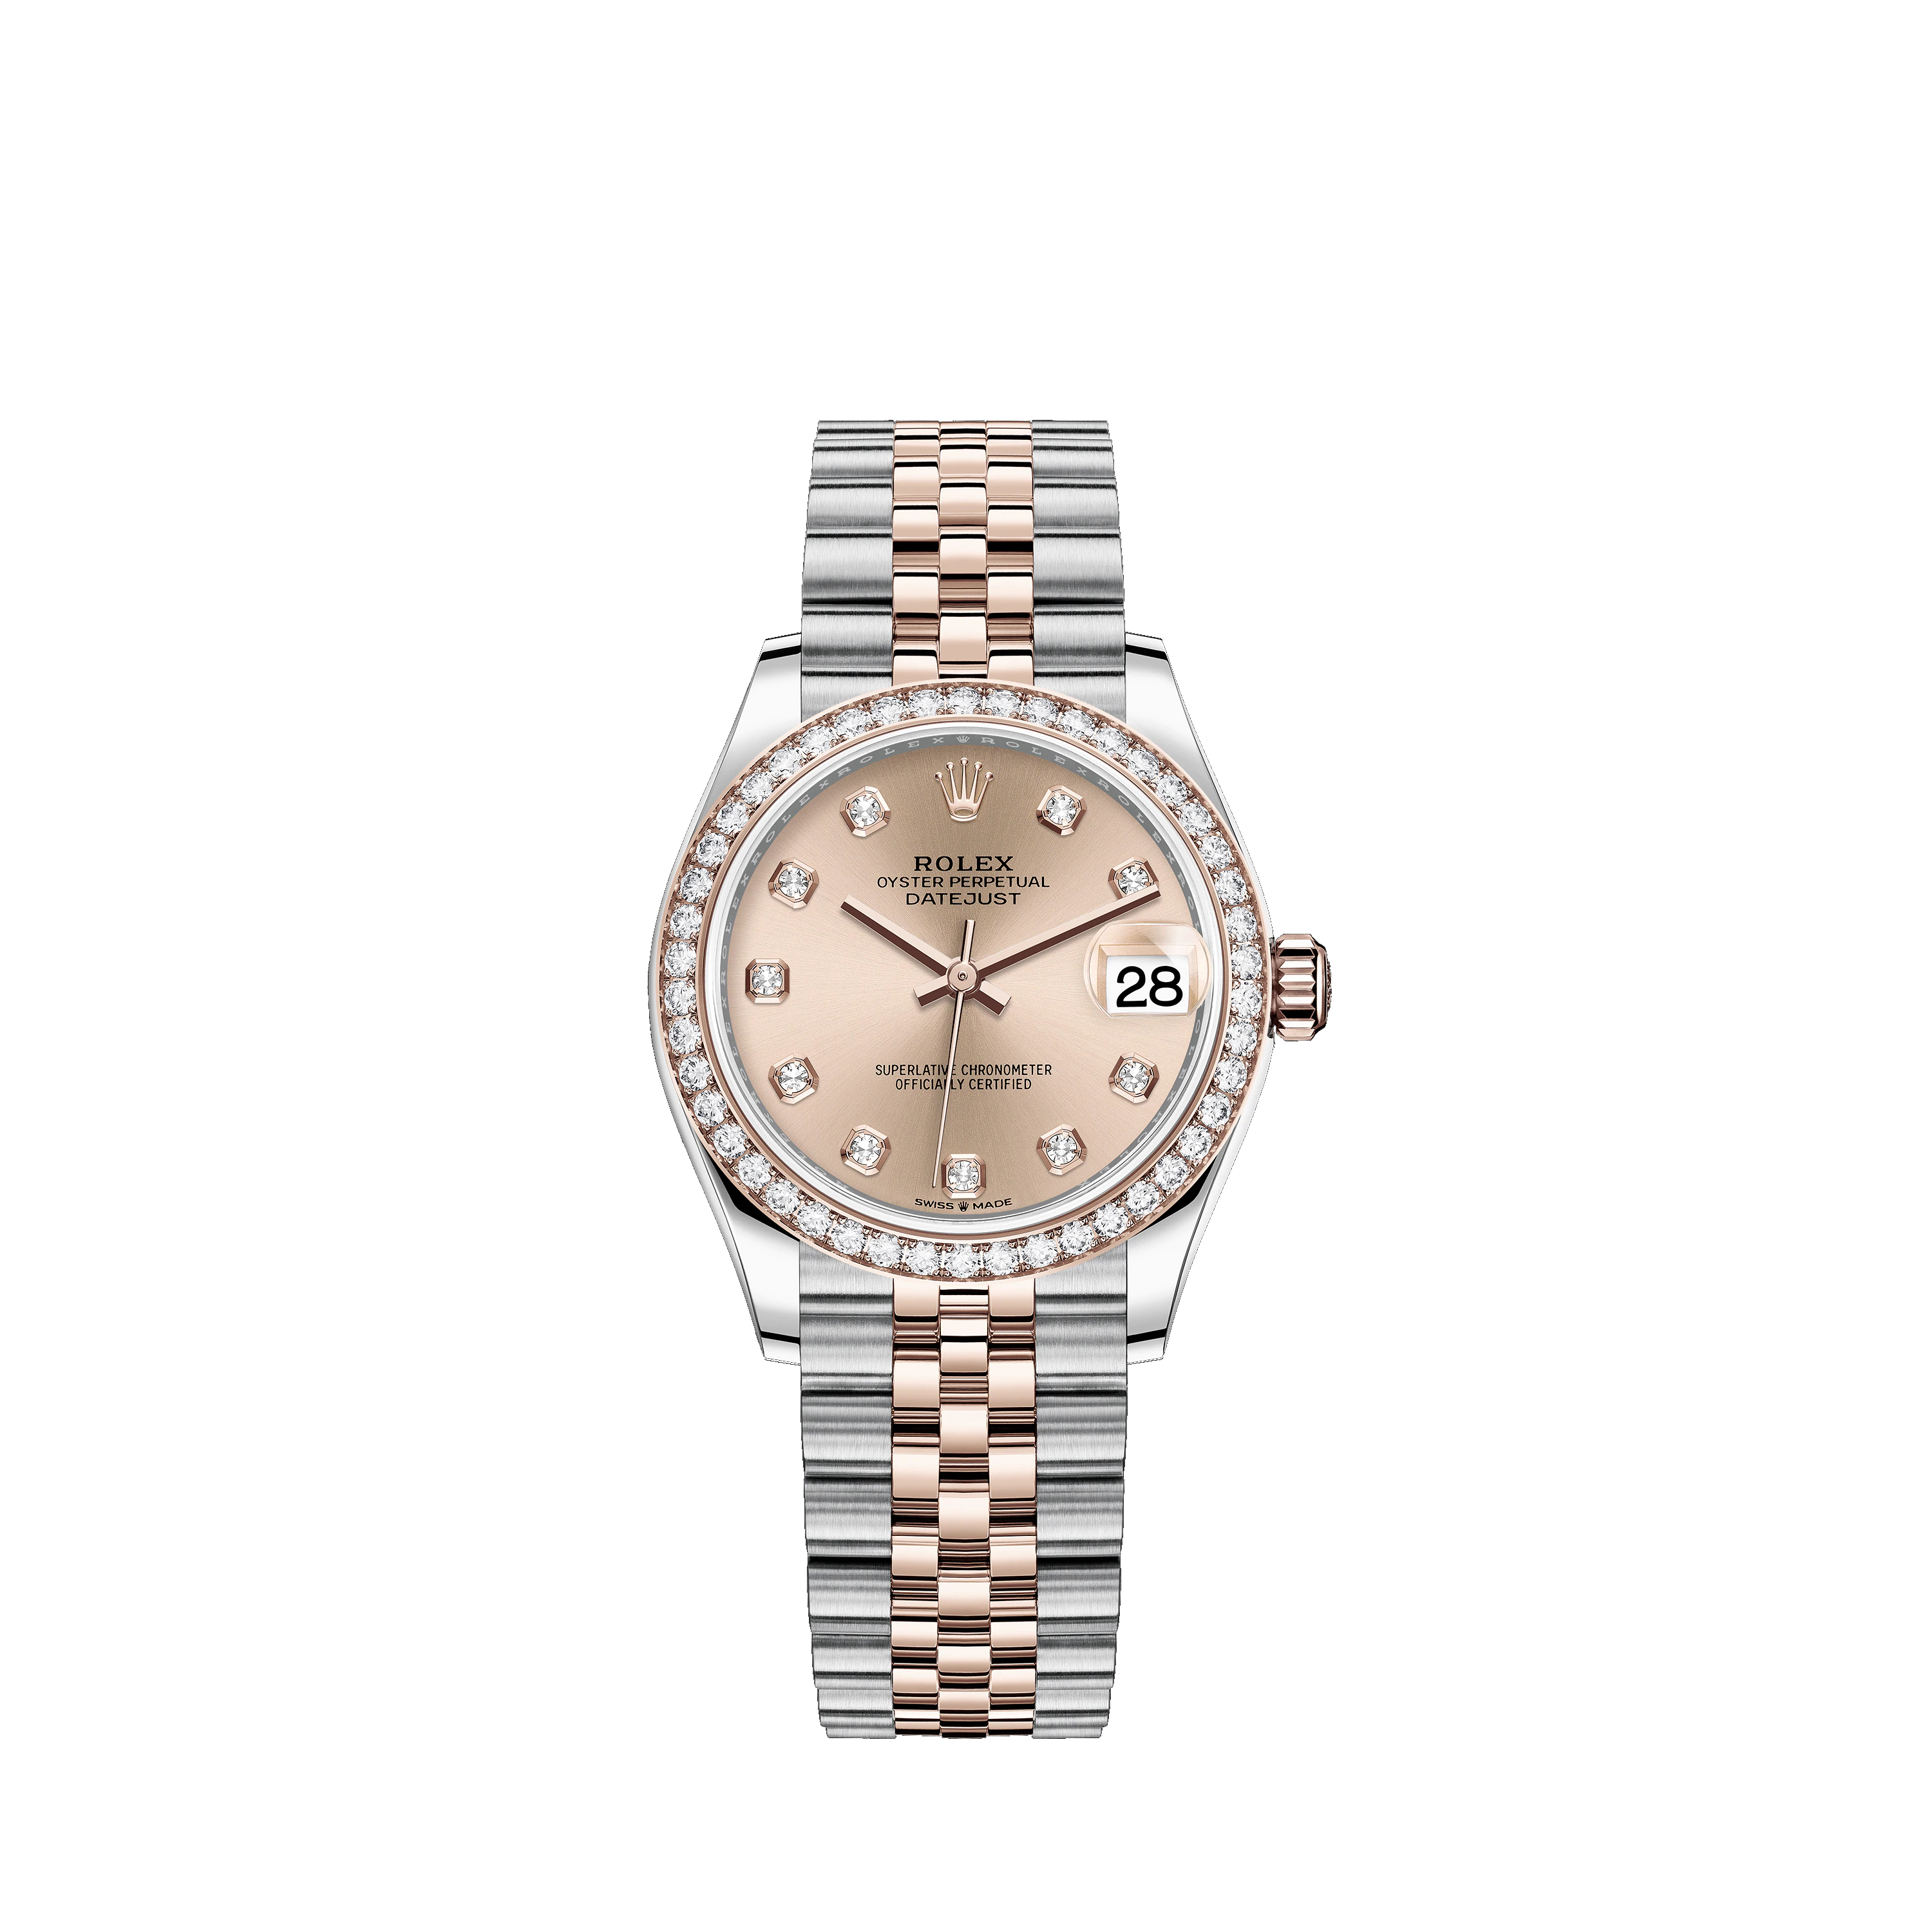 Datejust 31 278381RBR Rose Gold, Stainless Steel & Diamonds Watch (Rosé Colour Set with Diamonds)